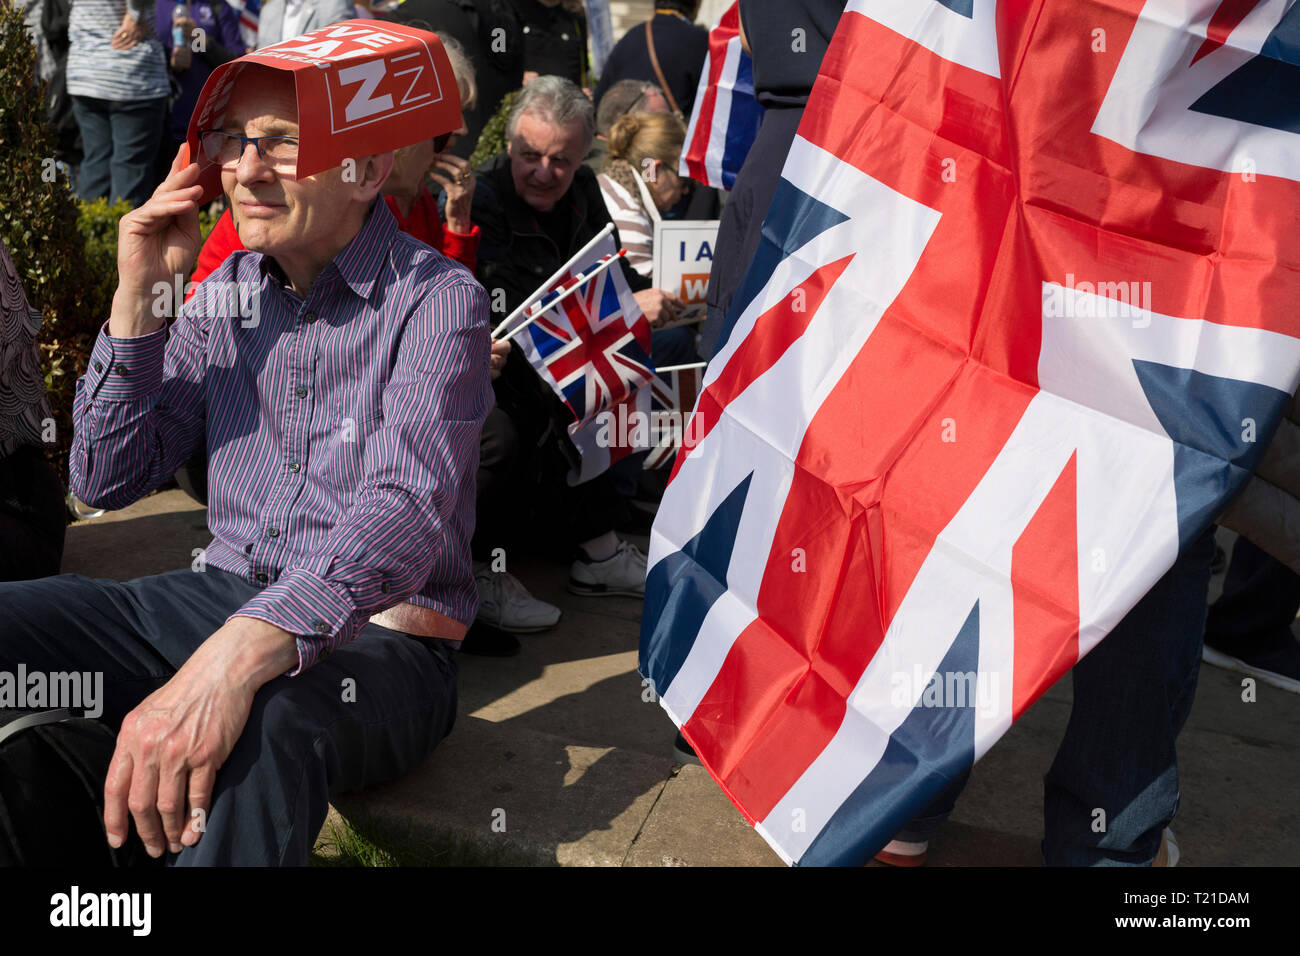 London, UK. 29th Mar, 2019. On the day that the UK was originally scheduled to leave the EU Prime Minister Theresa May also suffered her third vote defeat (for the EU withdrawal agreement), bringing a No Deal Brexit ever closer and Leave Brexiteers protest outside parliament in Westminster, in London, England. Photo by Richard Baker/Alamy Live News. Stock Photo